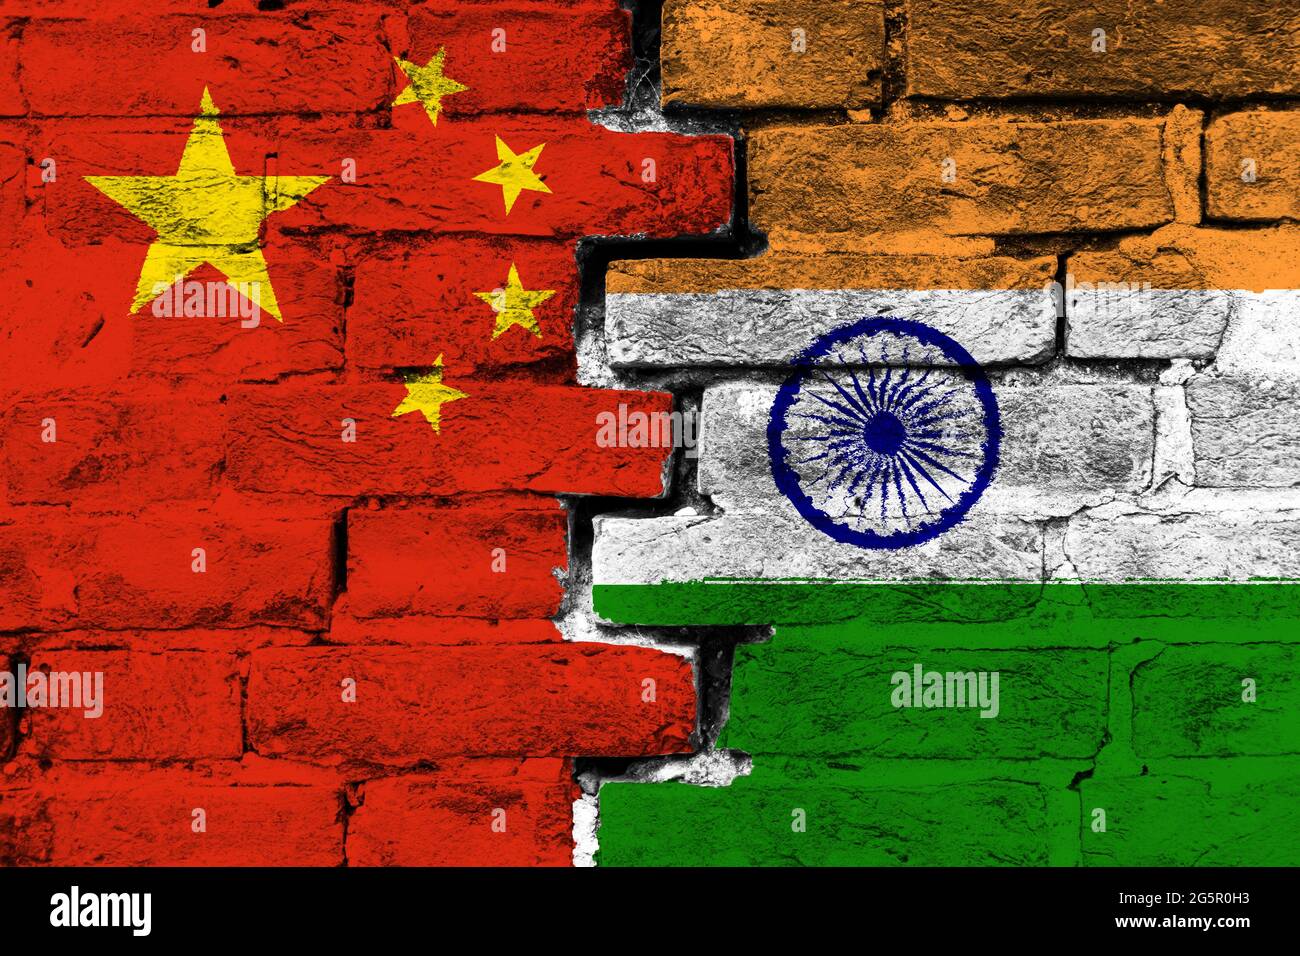 Concept of the relationship between China and India with two painted flags on a damaged brick wall Stock Photo